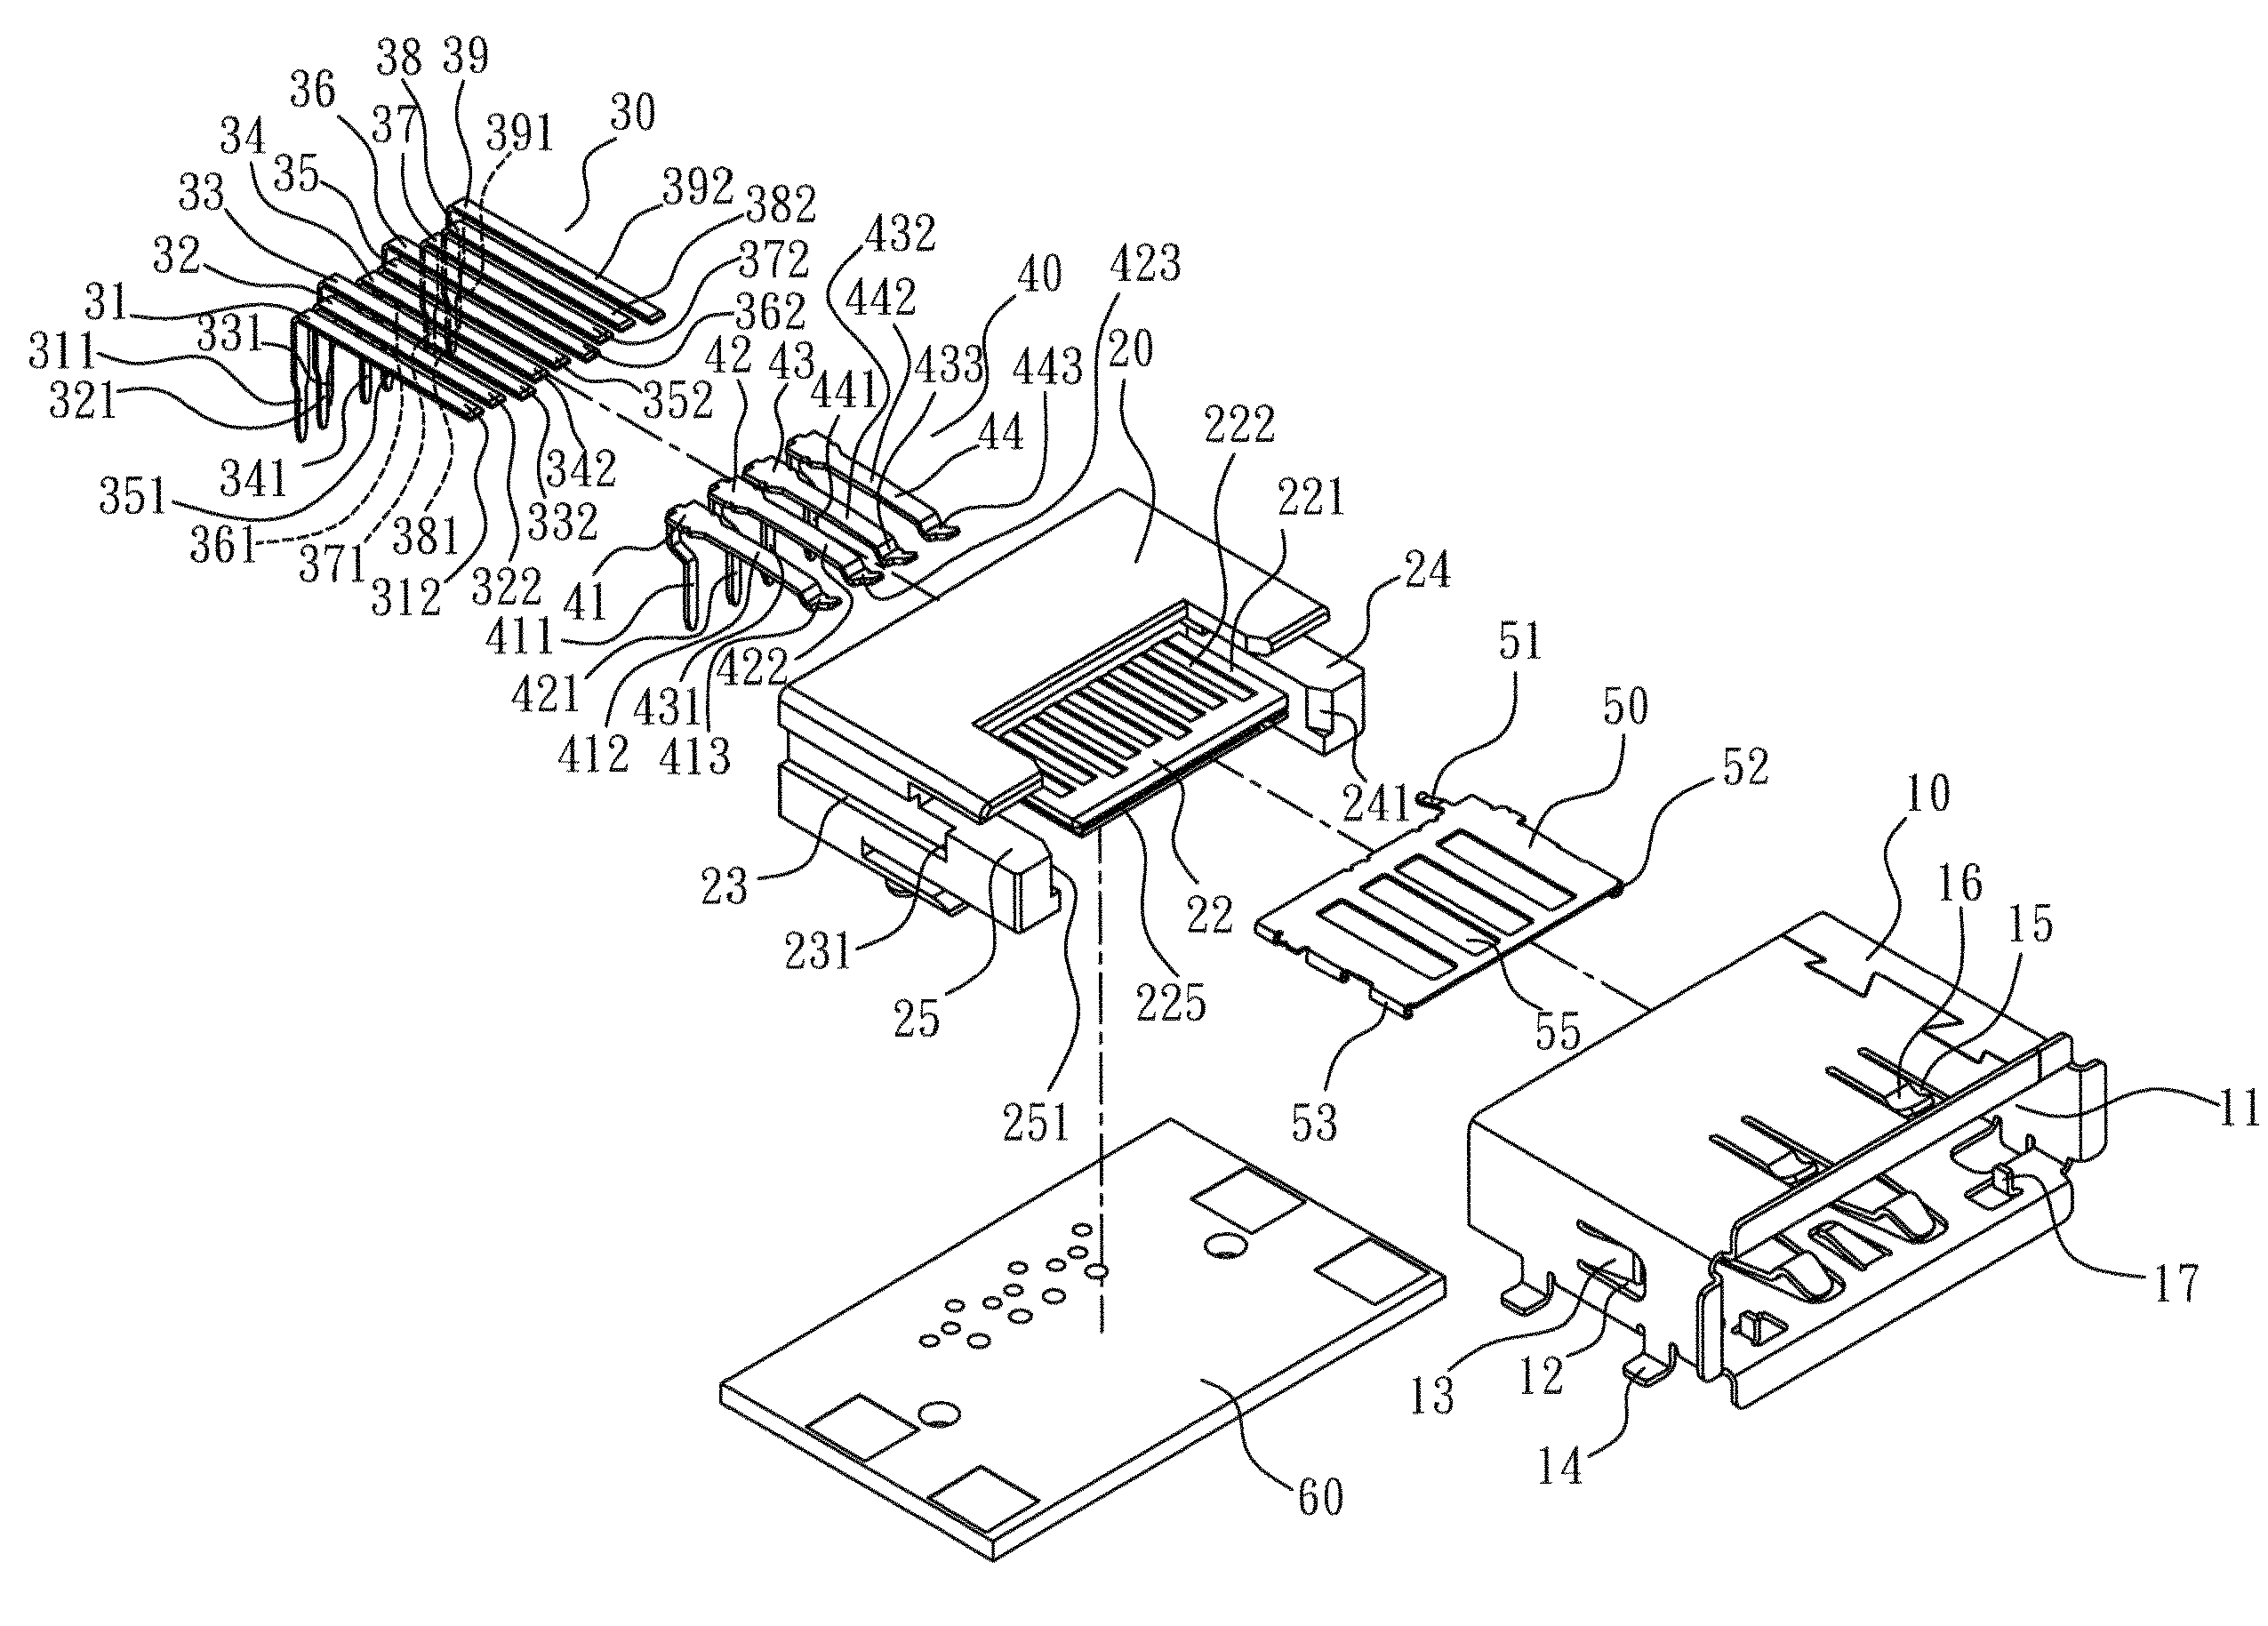 Electrical connector with first and second terminal assemblies